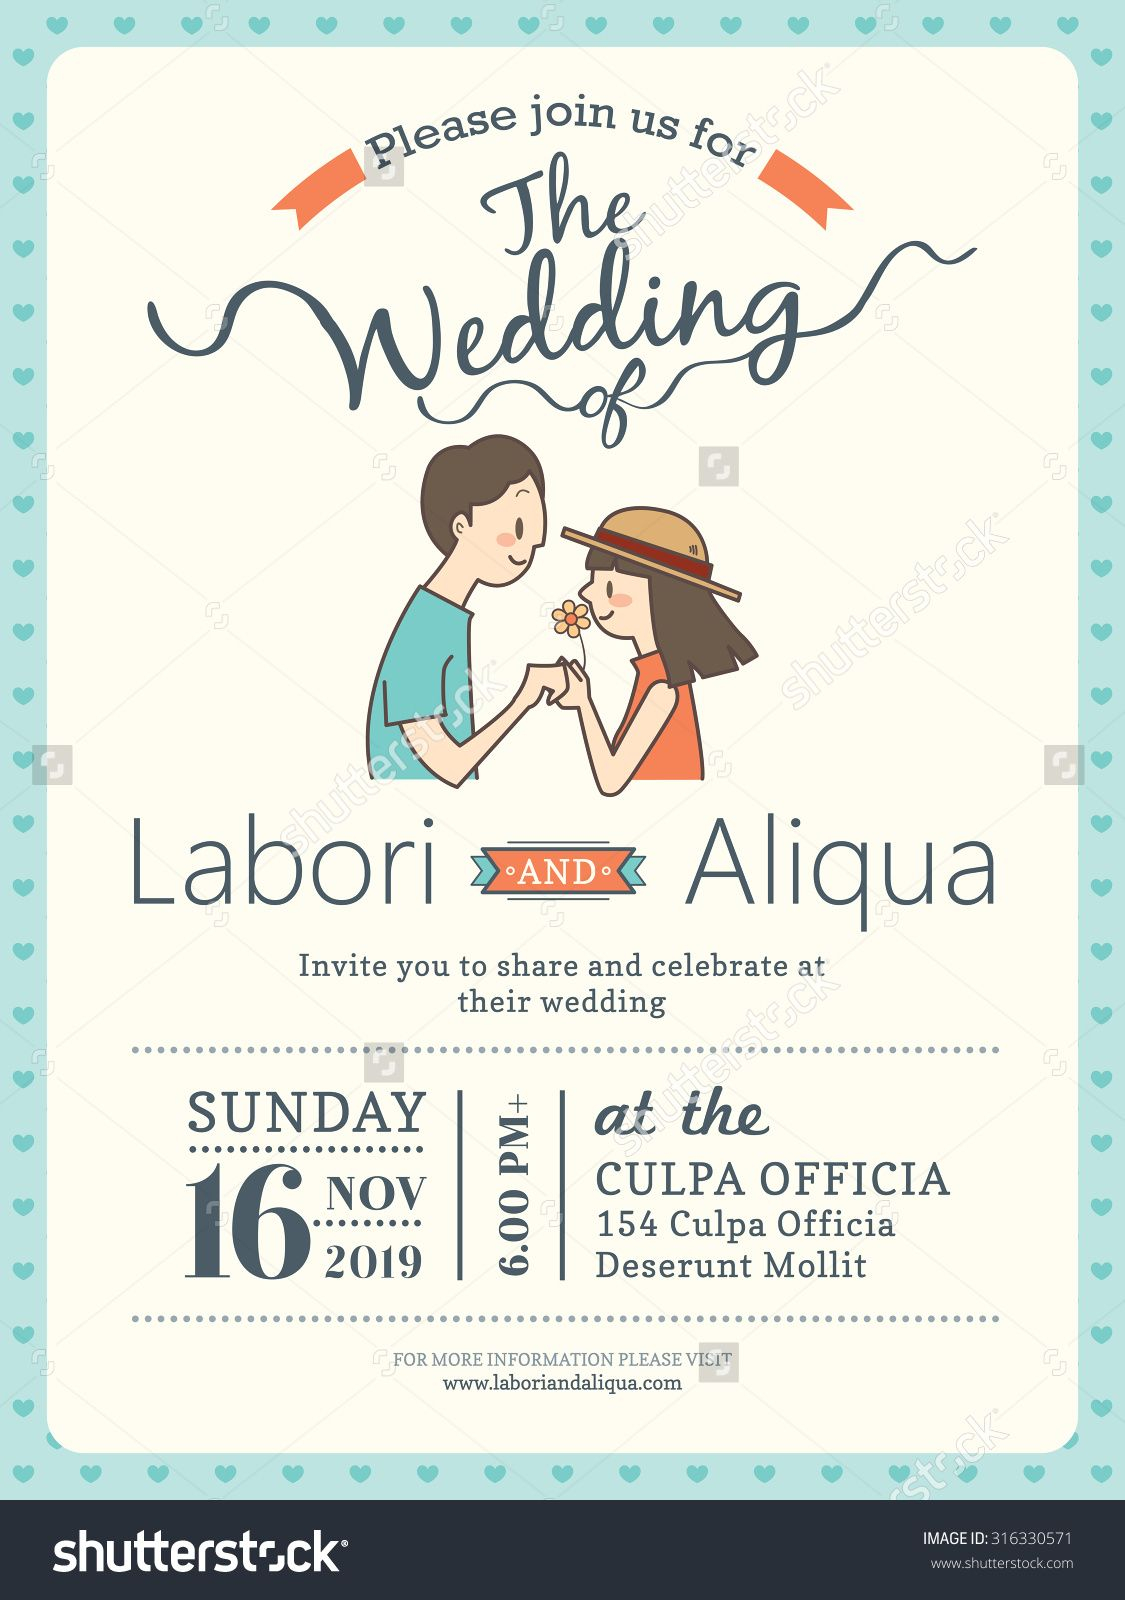 Wedding Invitation Card Template With Cute Groom And Bride Cartoon in sizing 1125 X 1600